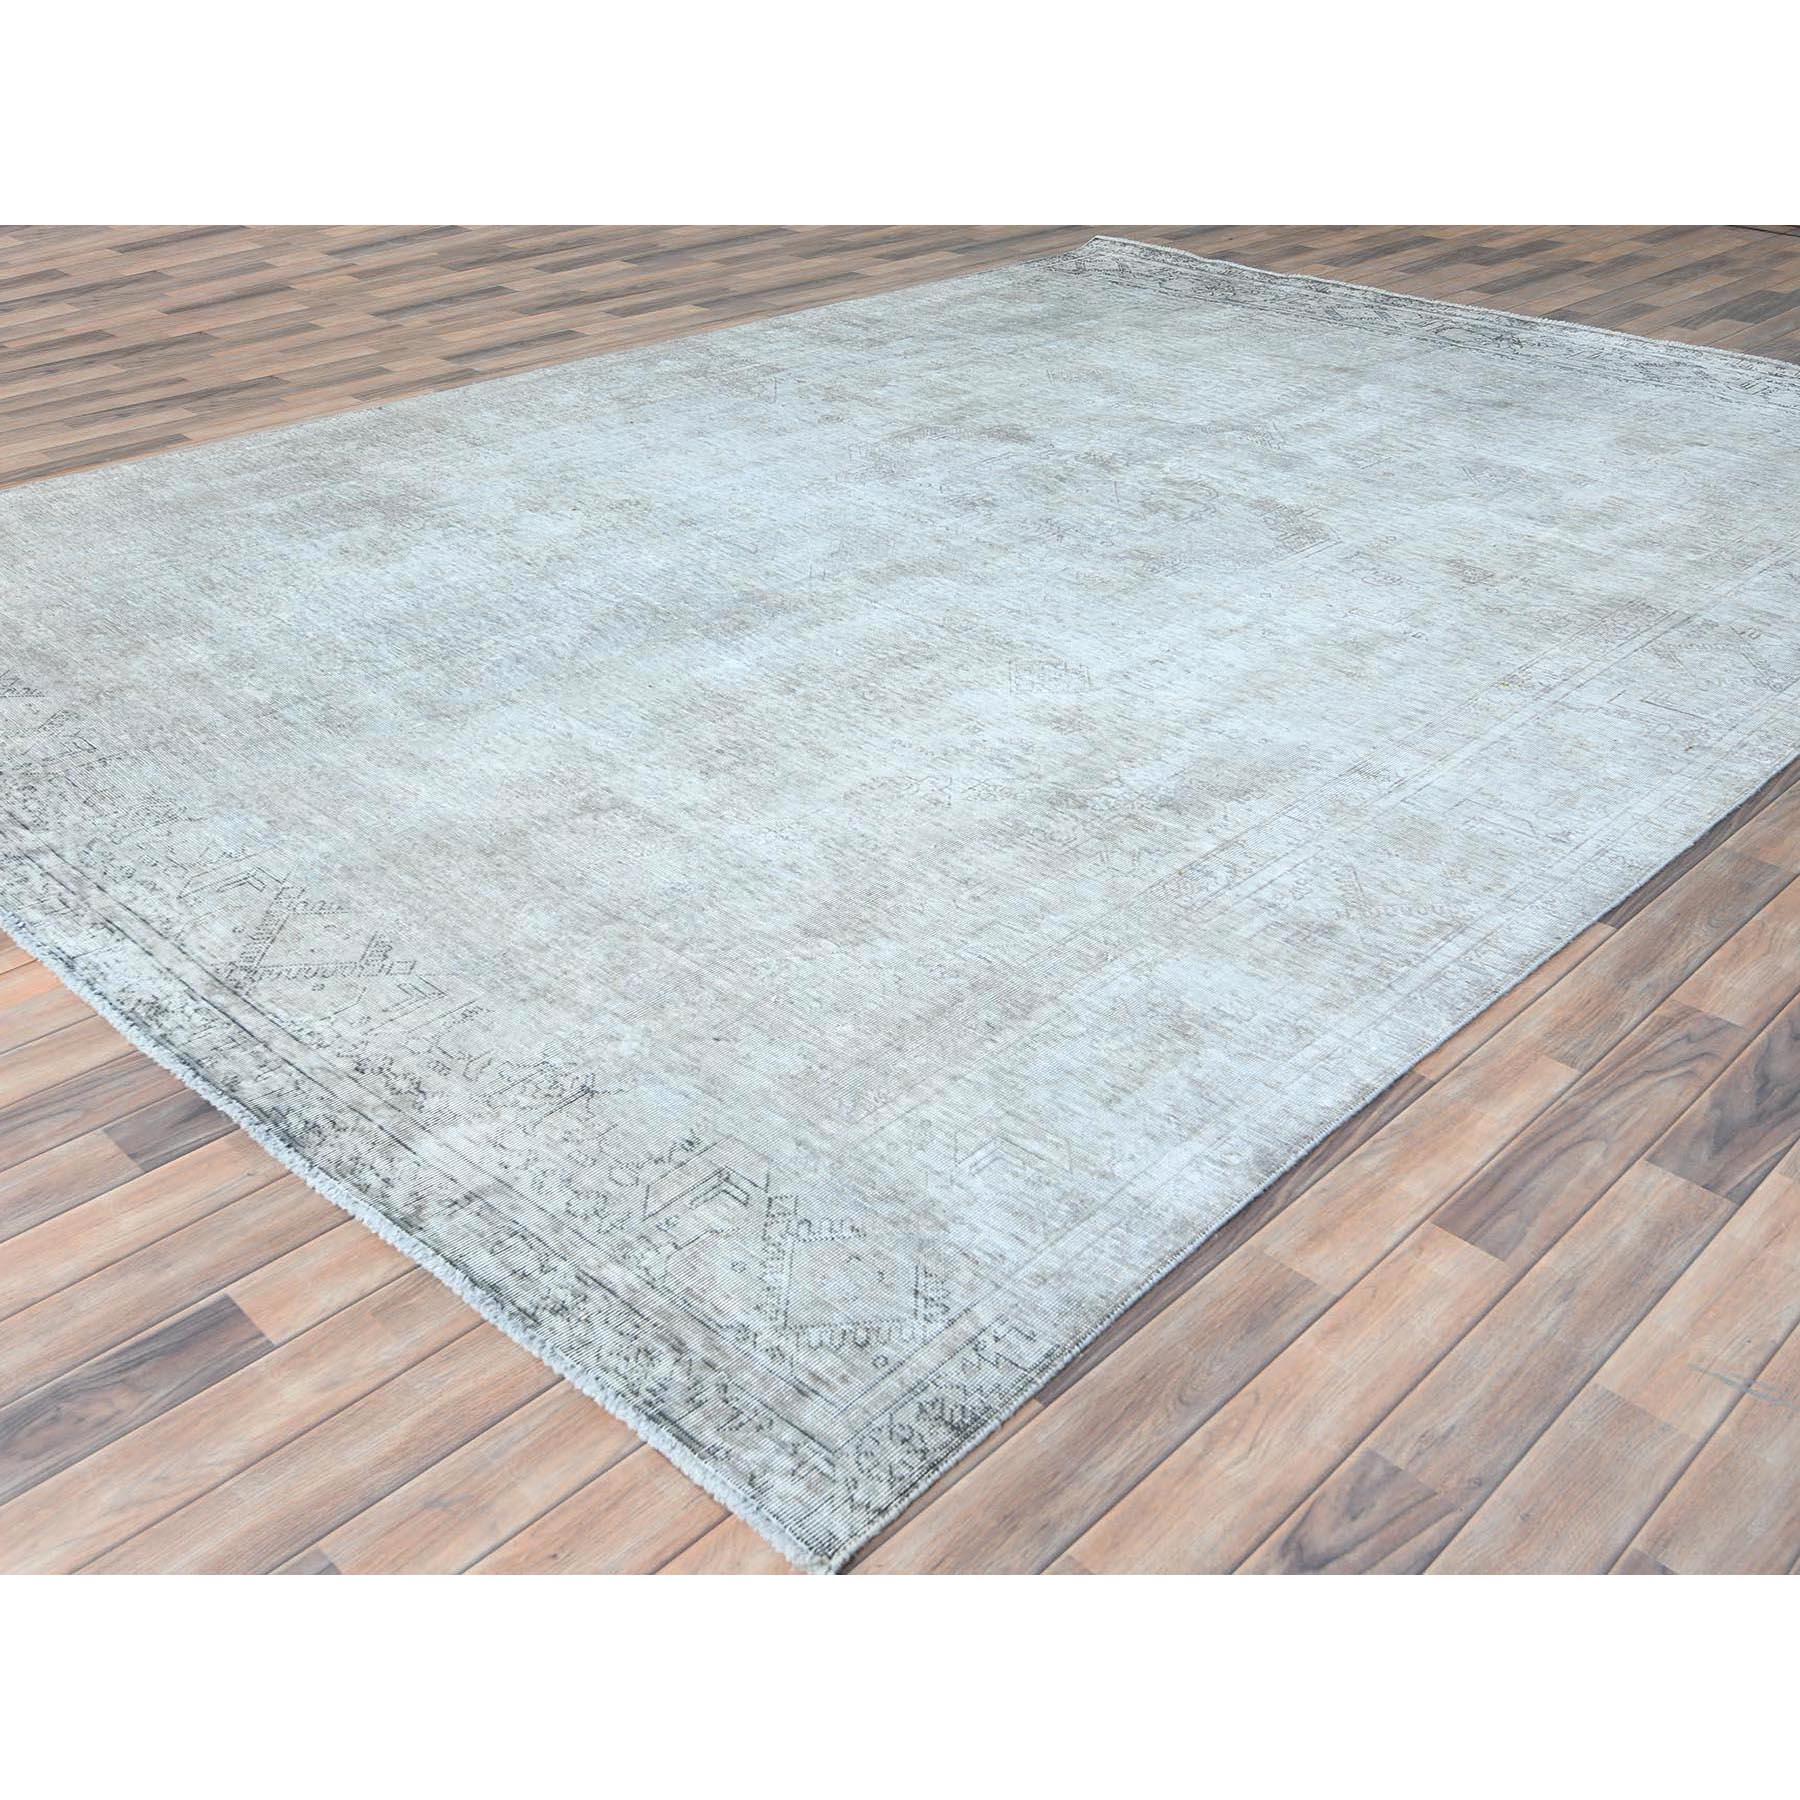 Hand-Knotted Ivory Vintage Persian Tabriz Worn Down Rustic Feel Worn Wool Hand Knotted Rug